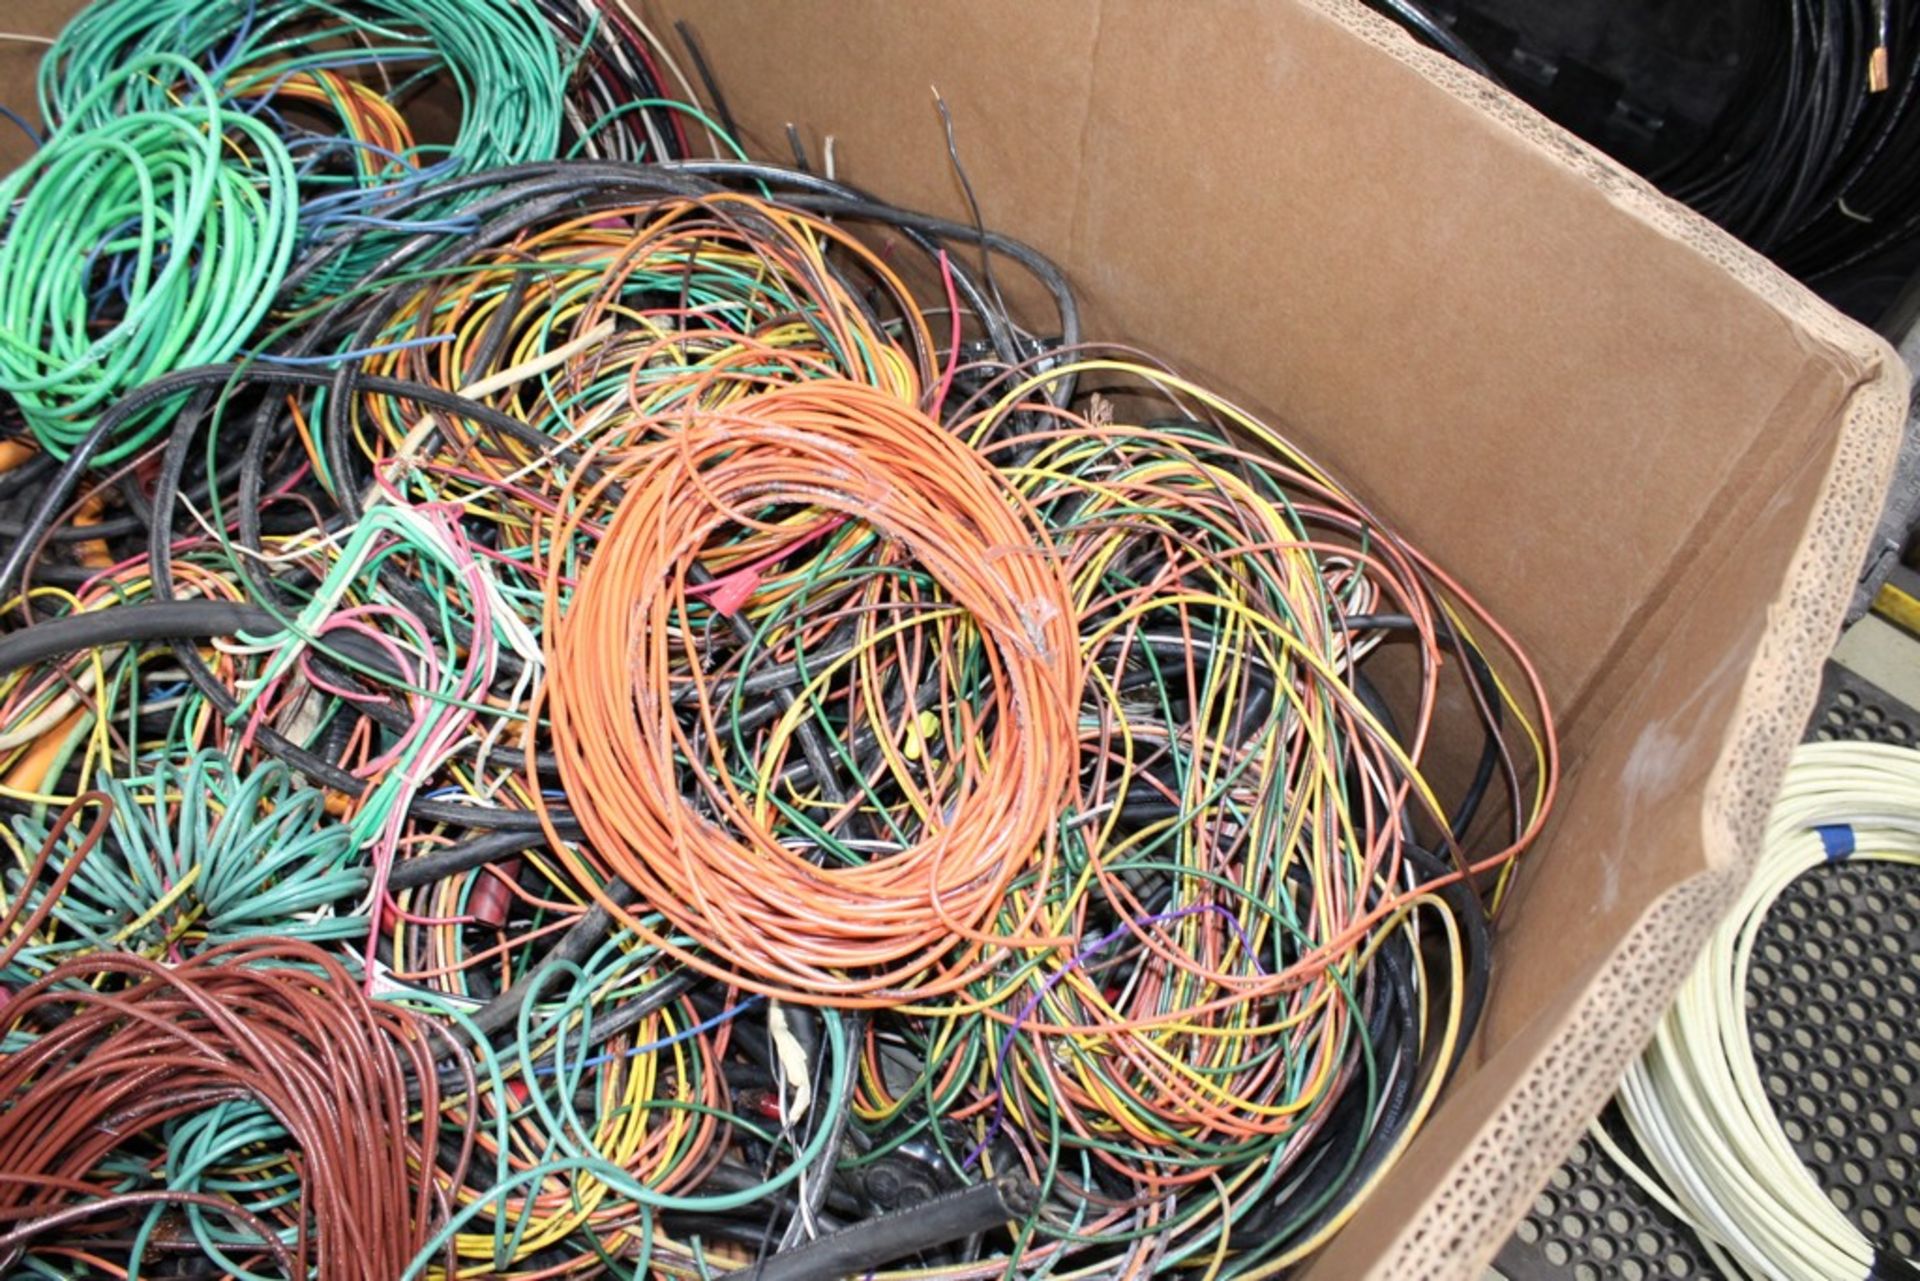 LARGE QUANTITY OF SCRAP WIRE IN CARDBOARD GAYLORD - Image 3 of 4